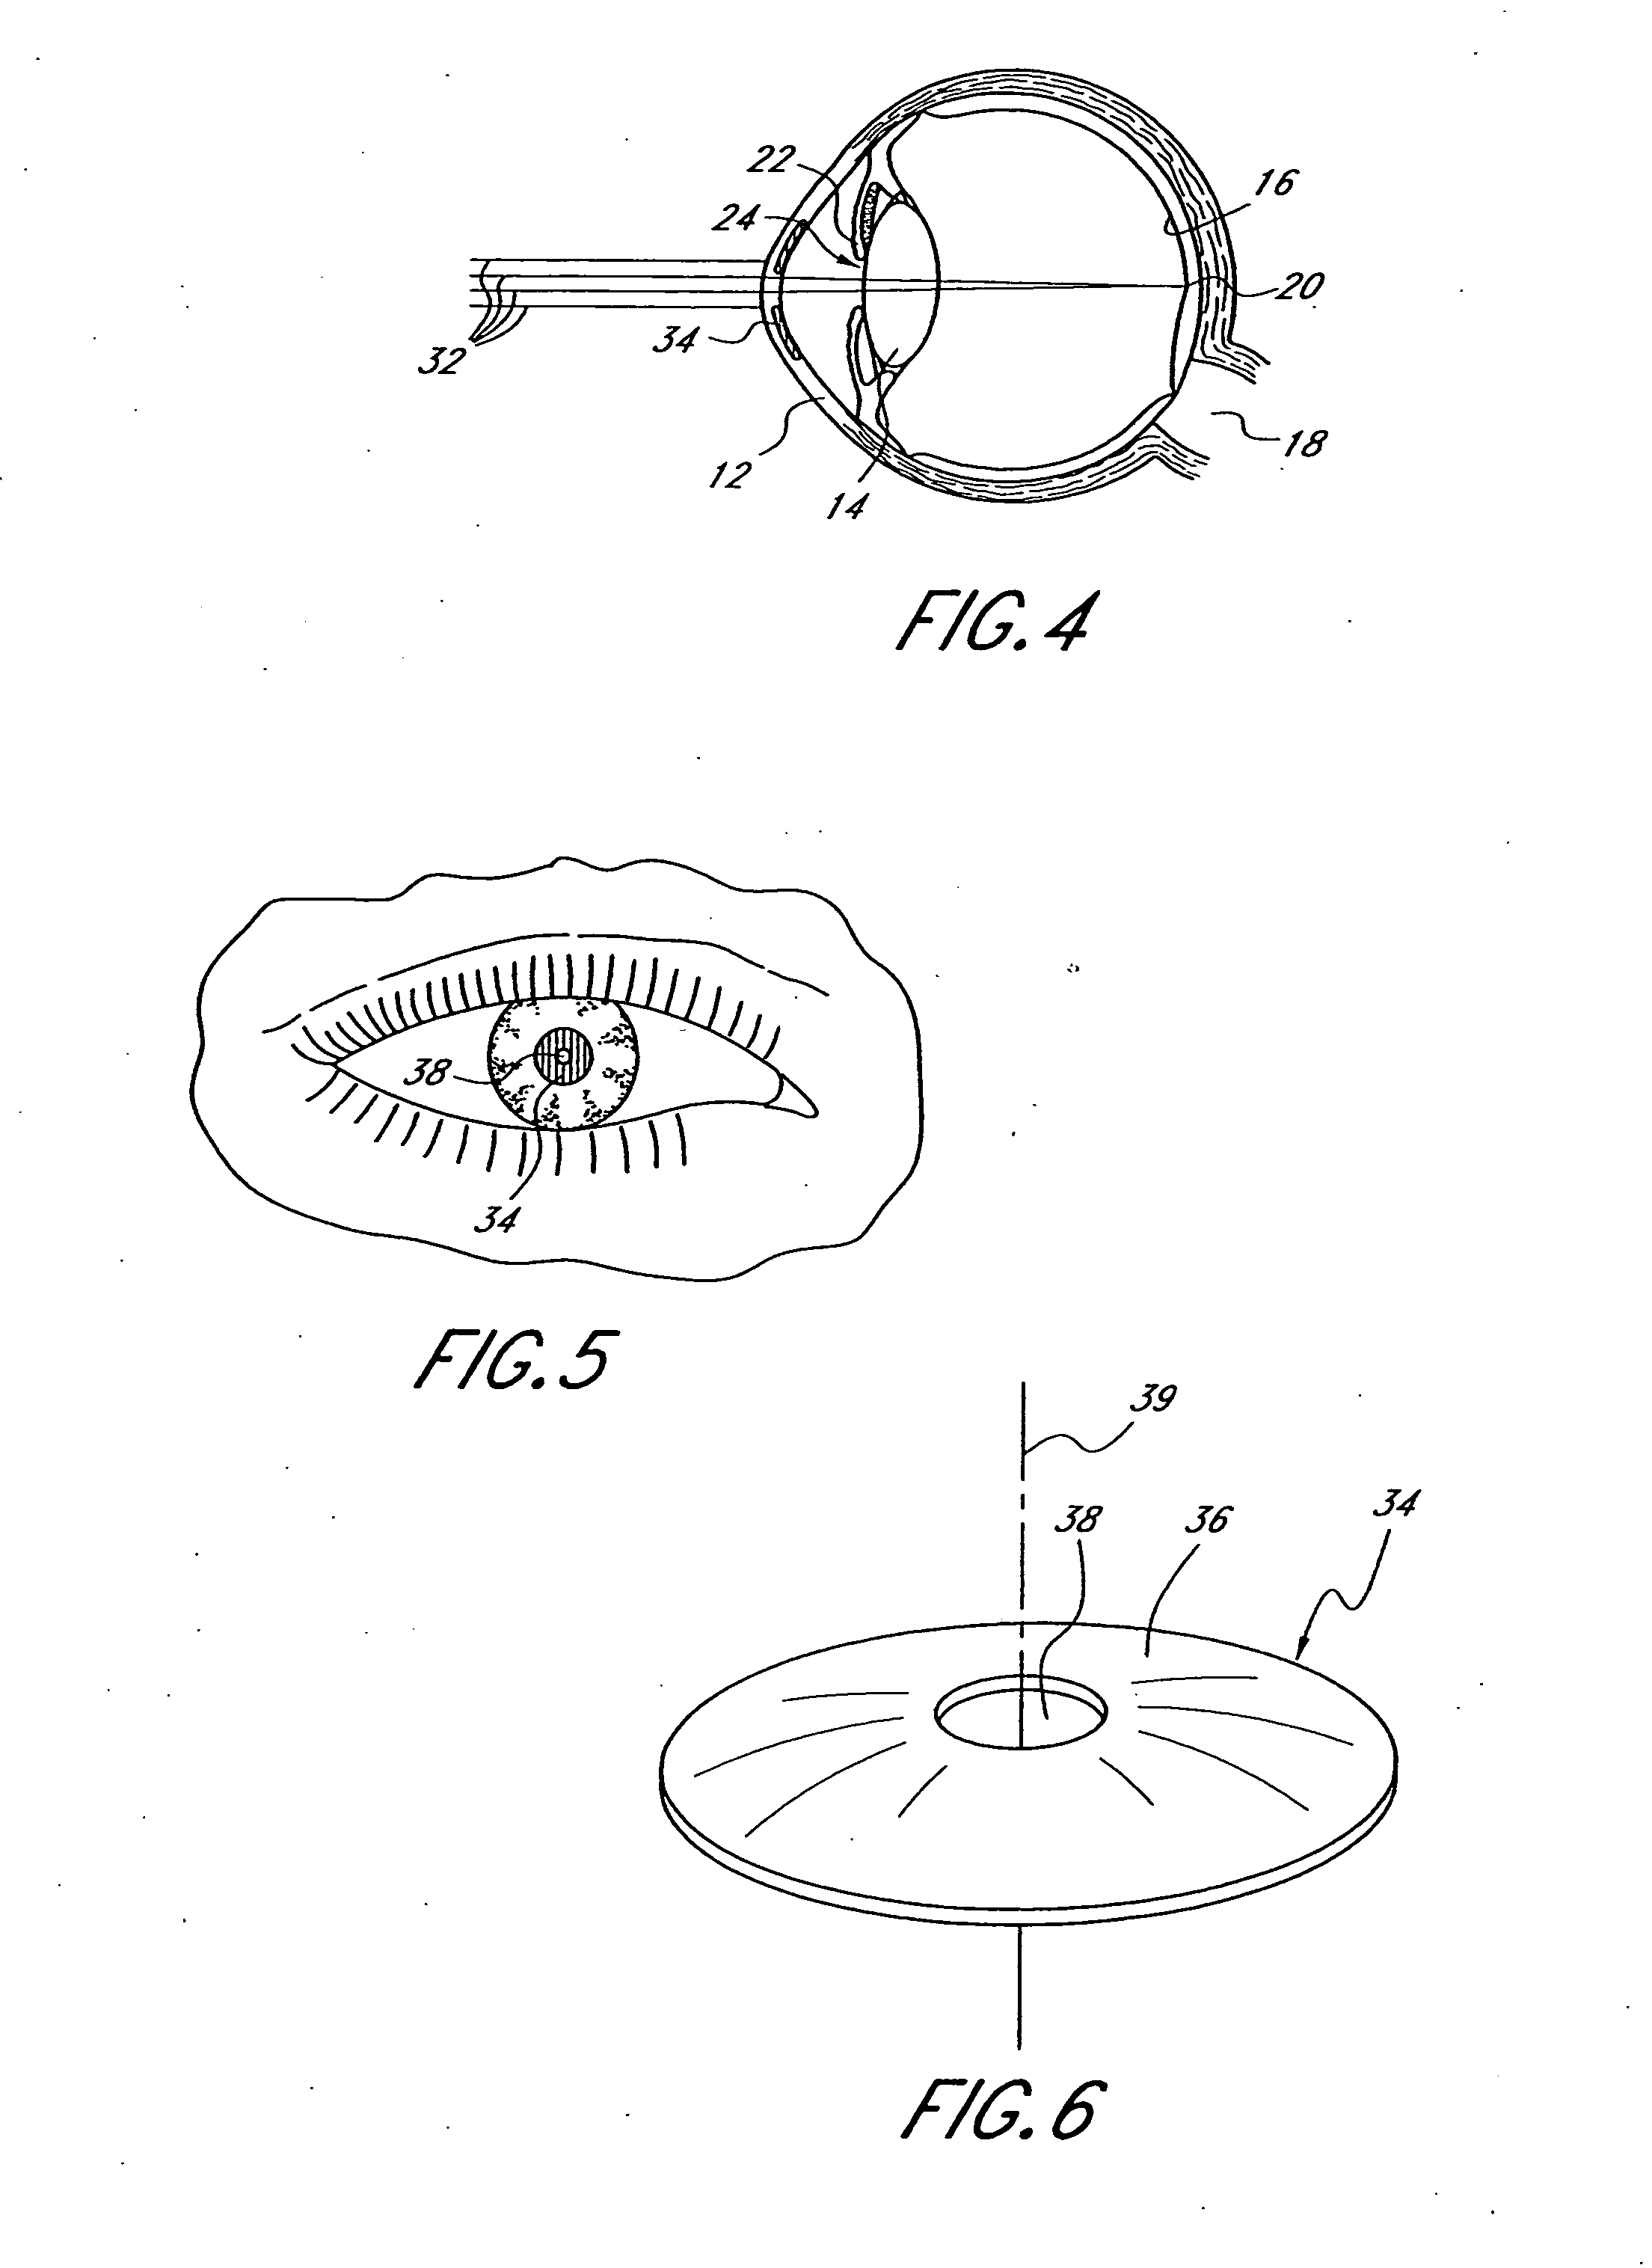 Method and apparatus for aligning a mask with the visual axis of an eye